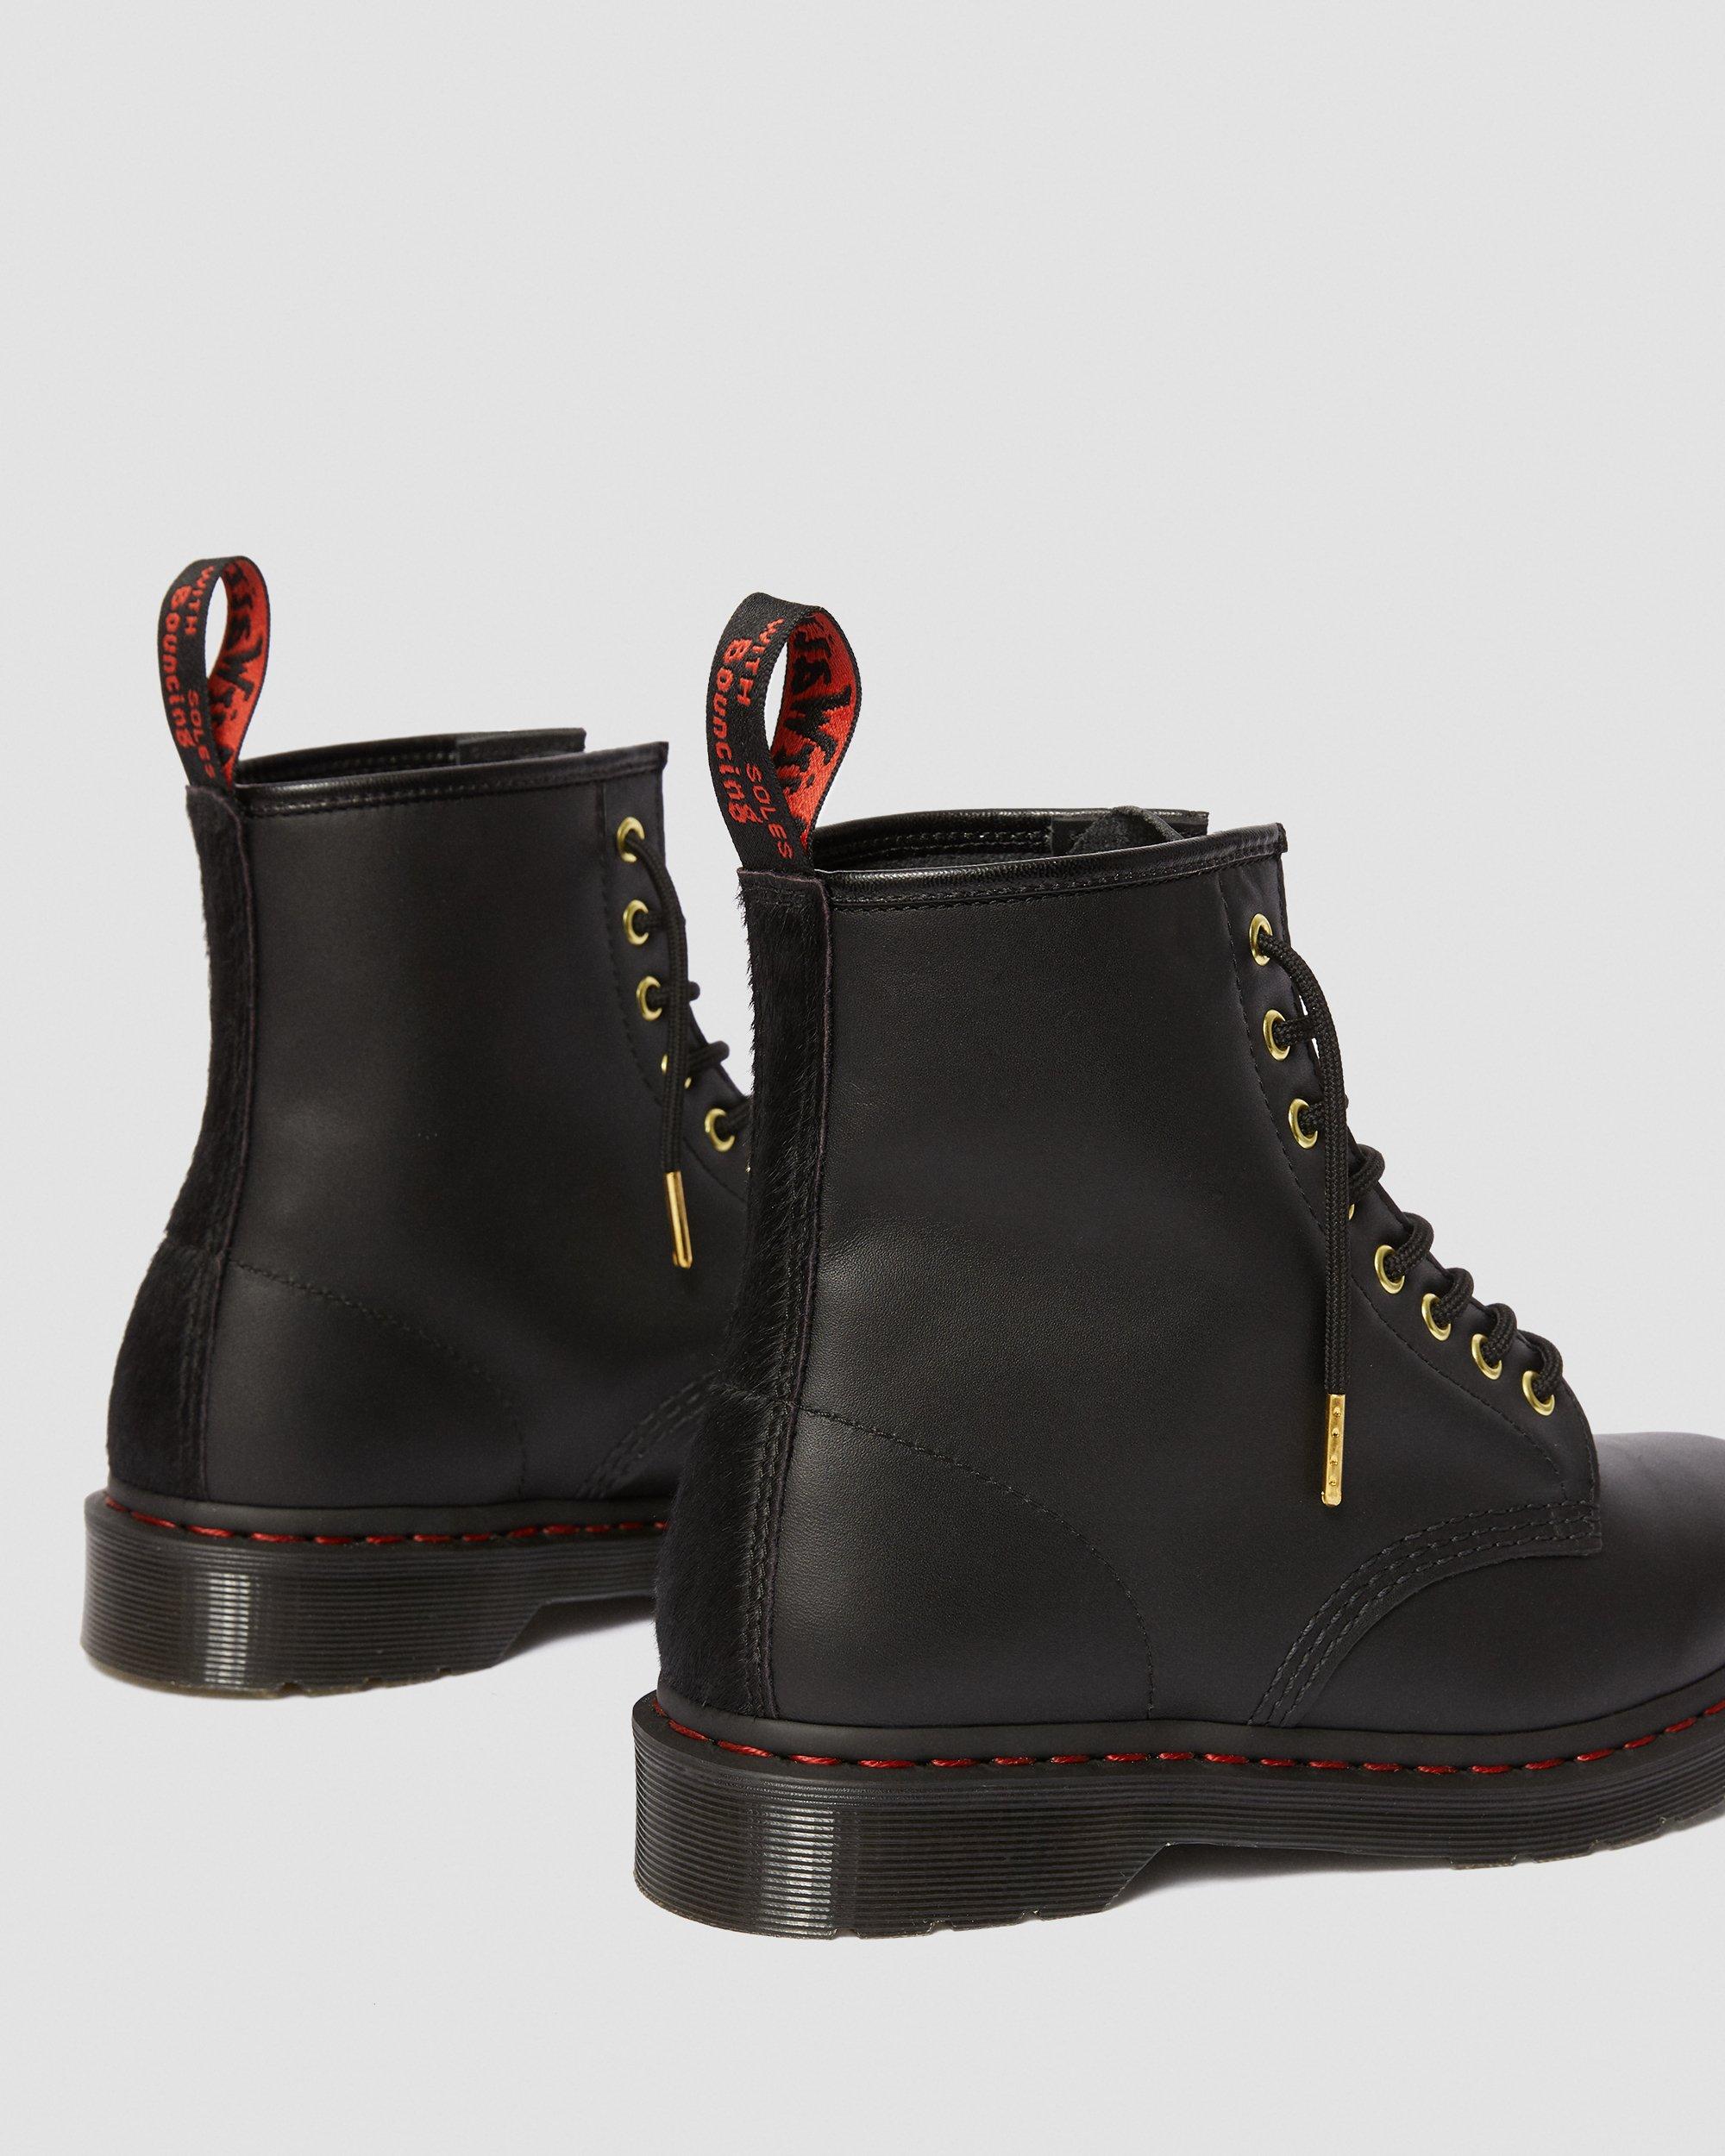 dr martens chinese new year